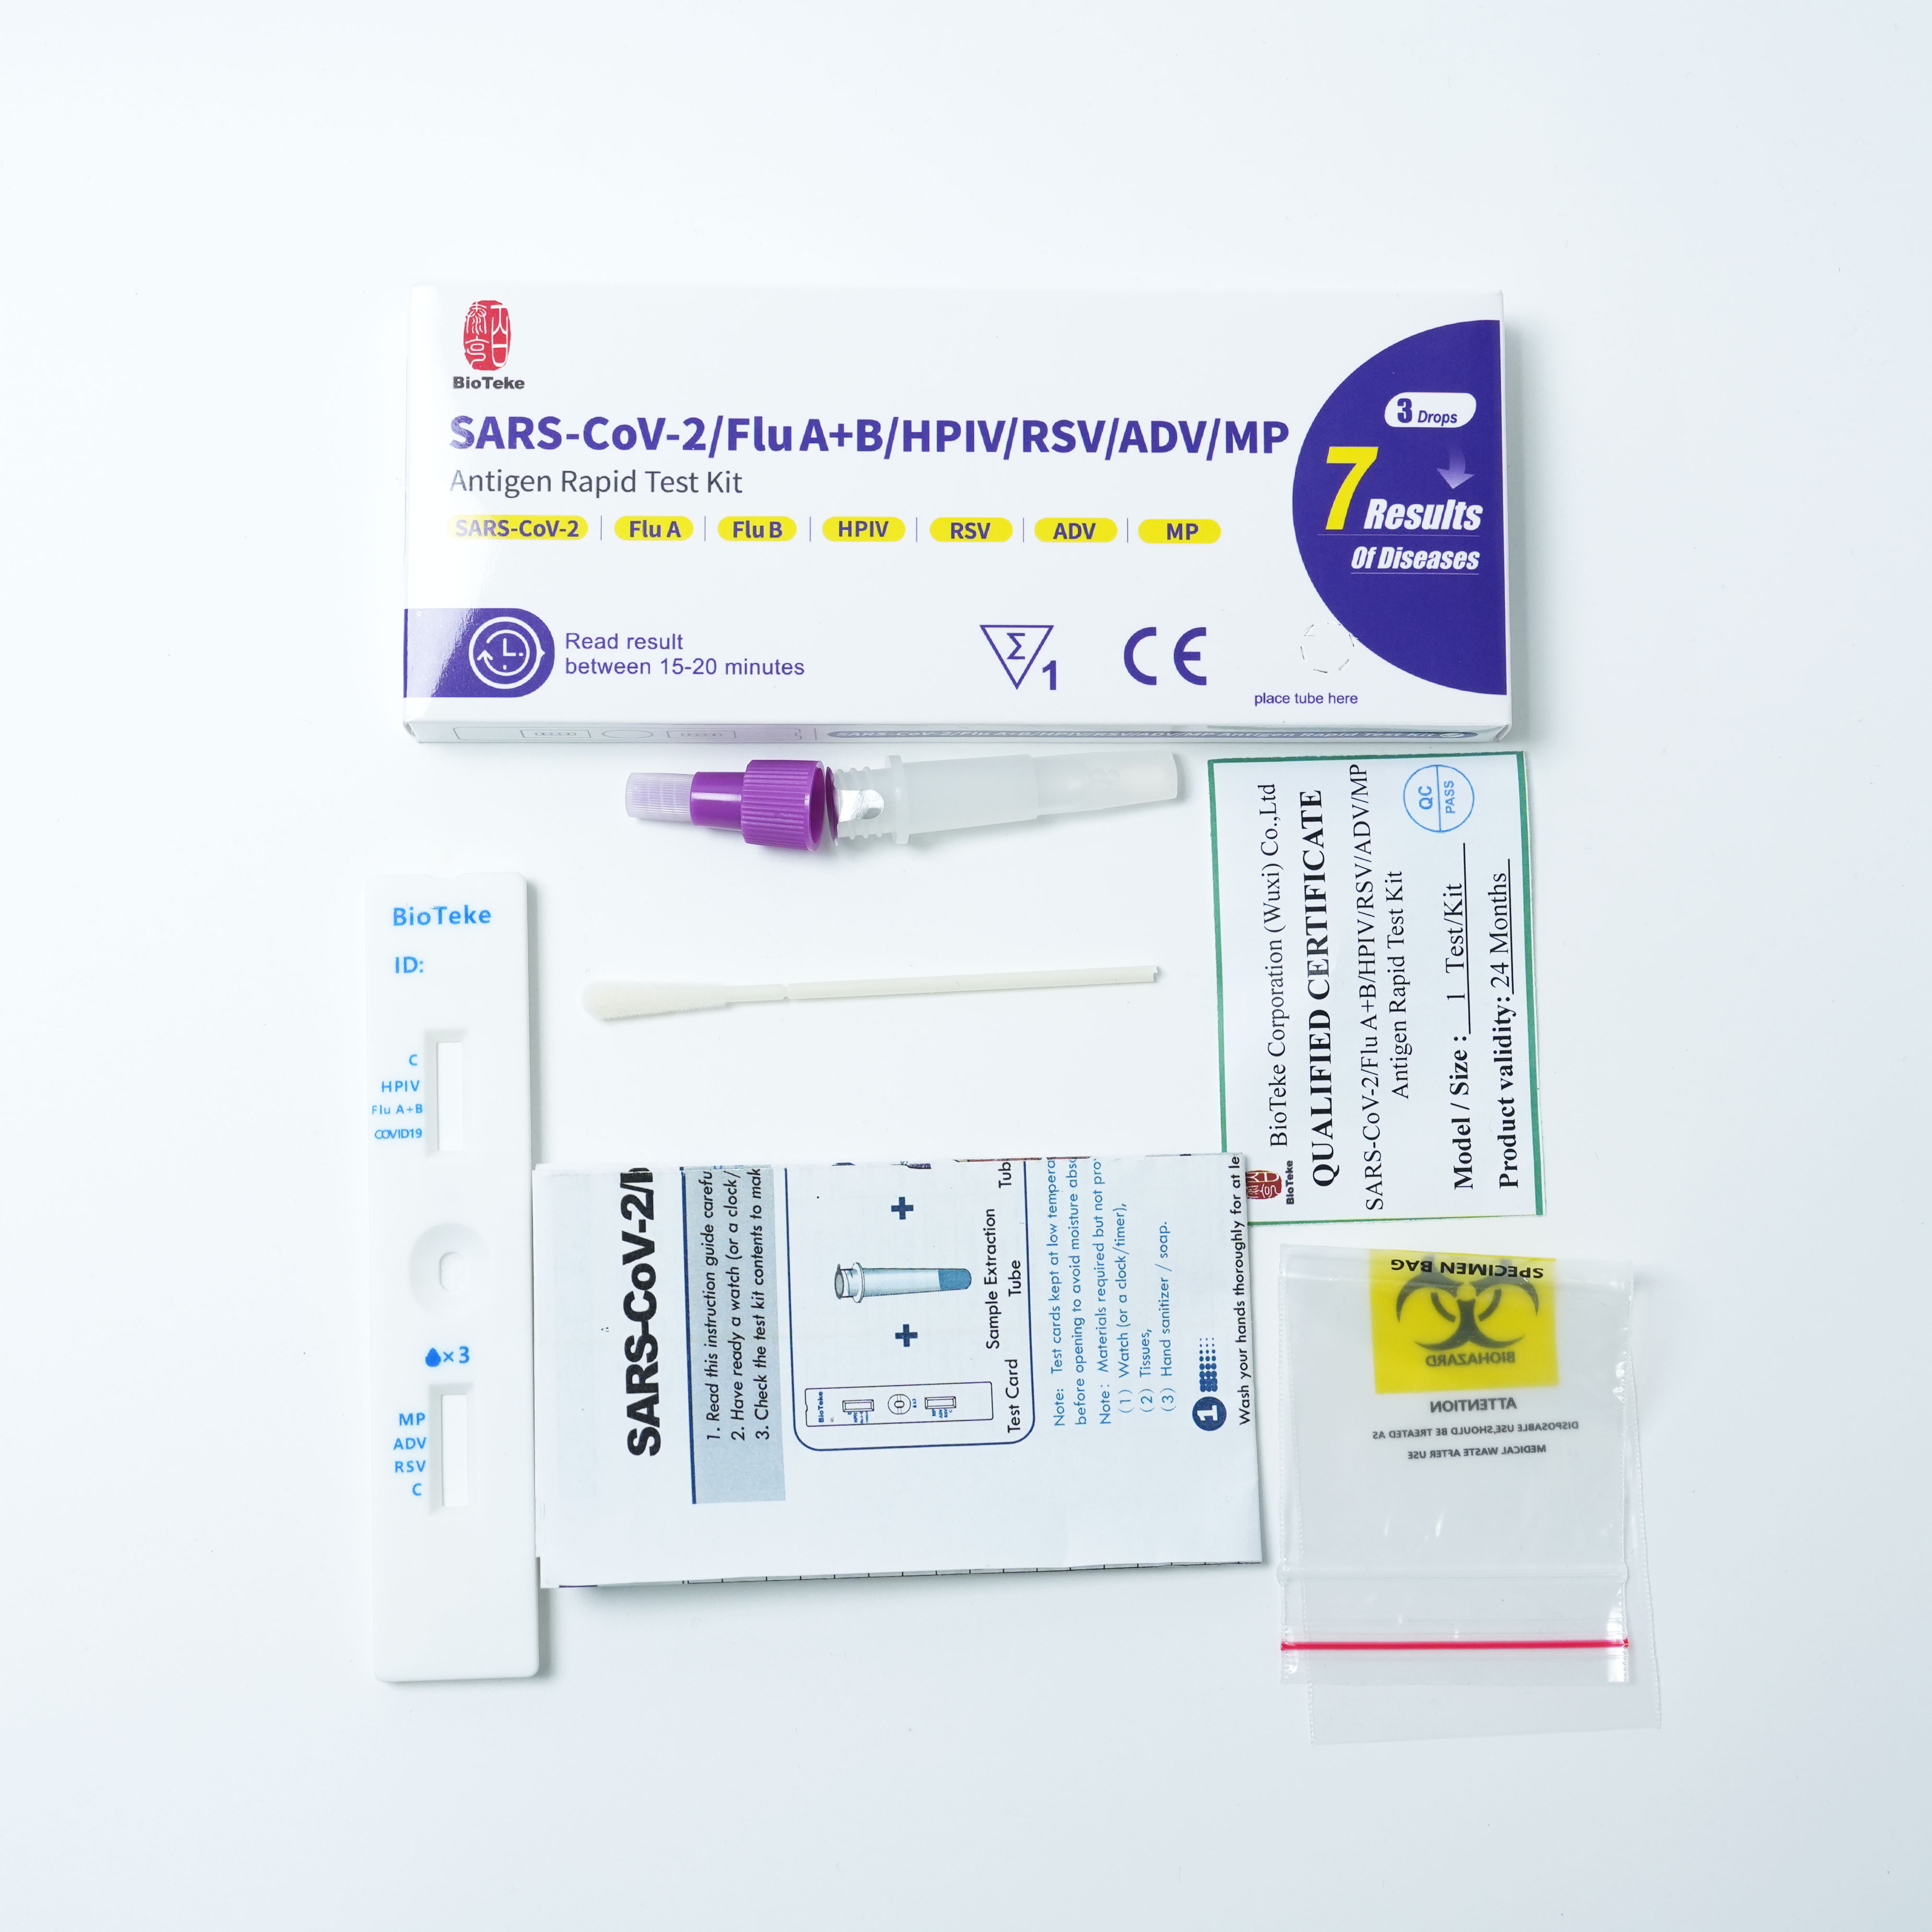 New Products Are Online! 7 In 1 Respiratory Multiple Pathogen Antigen Test Kit!